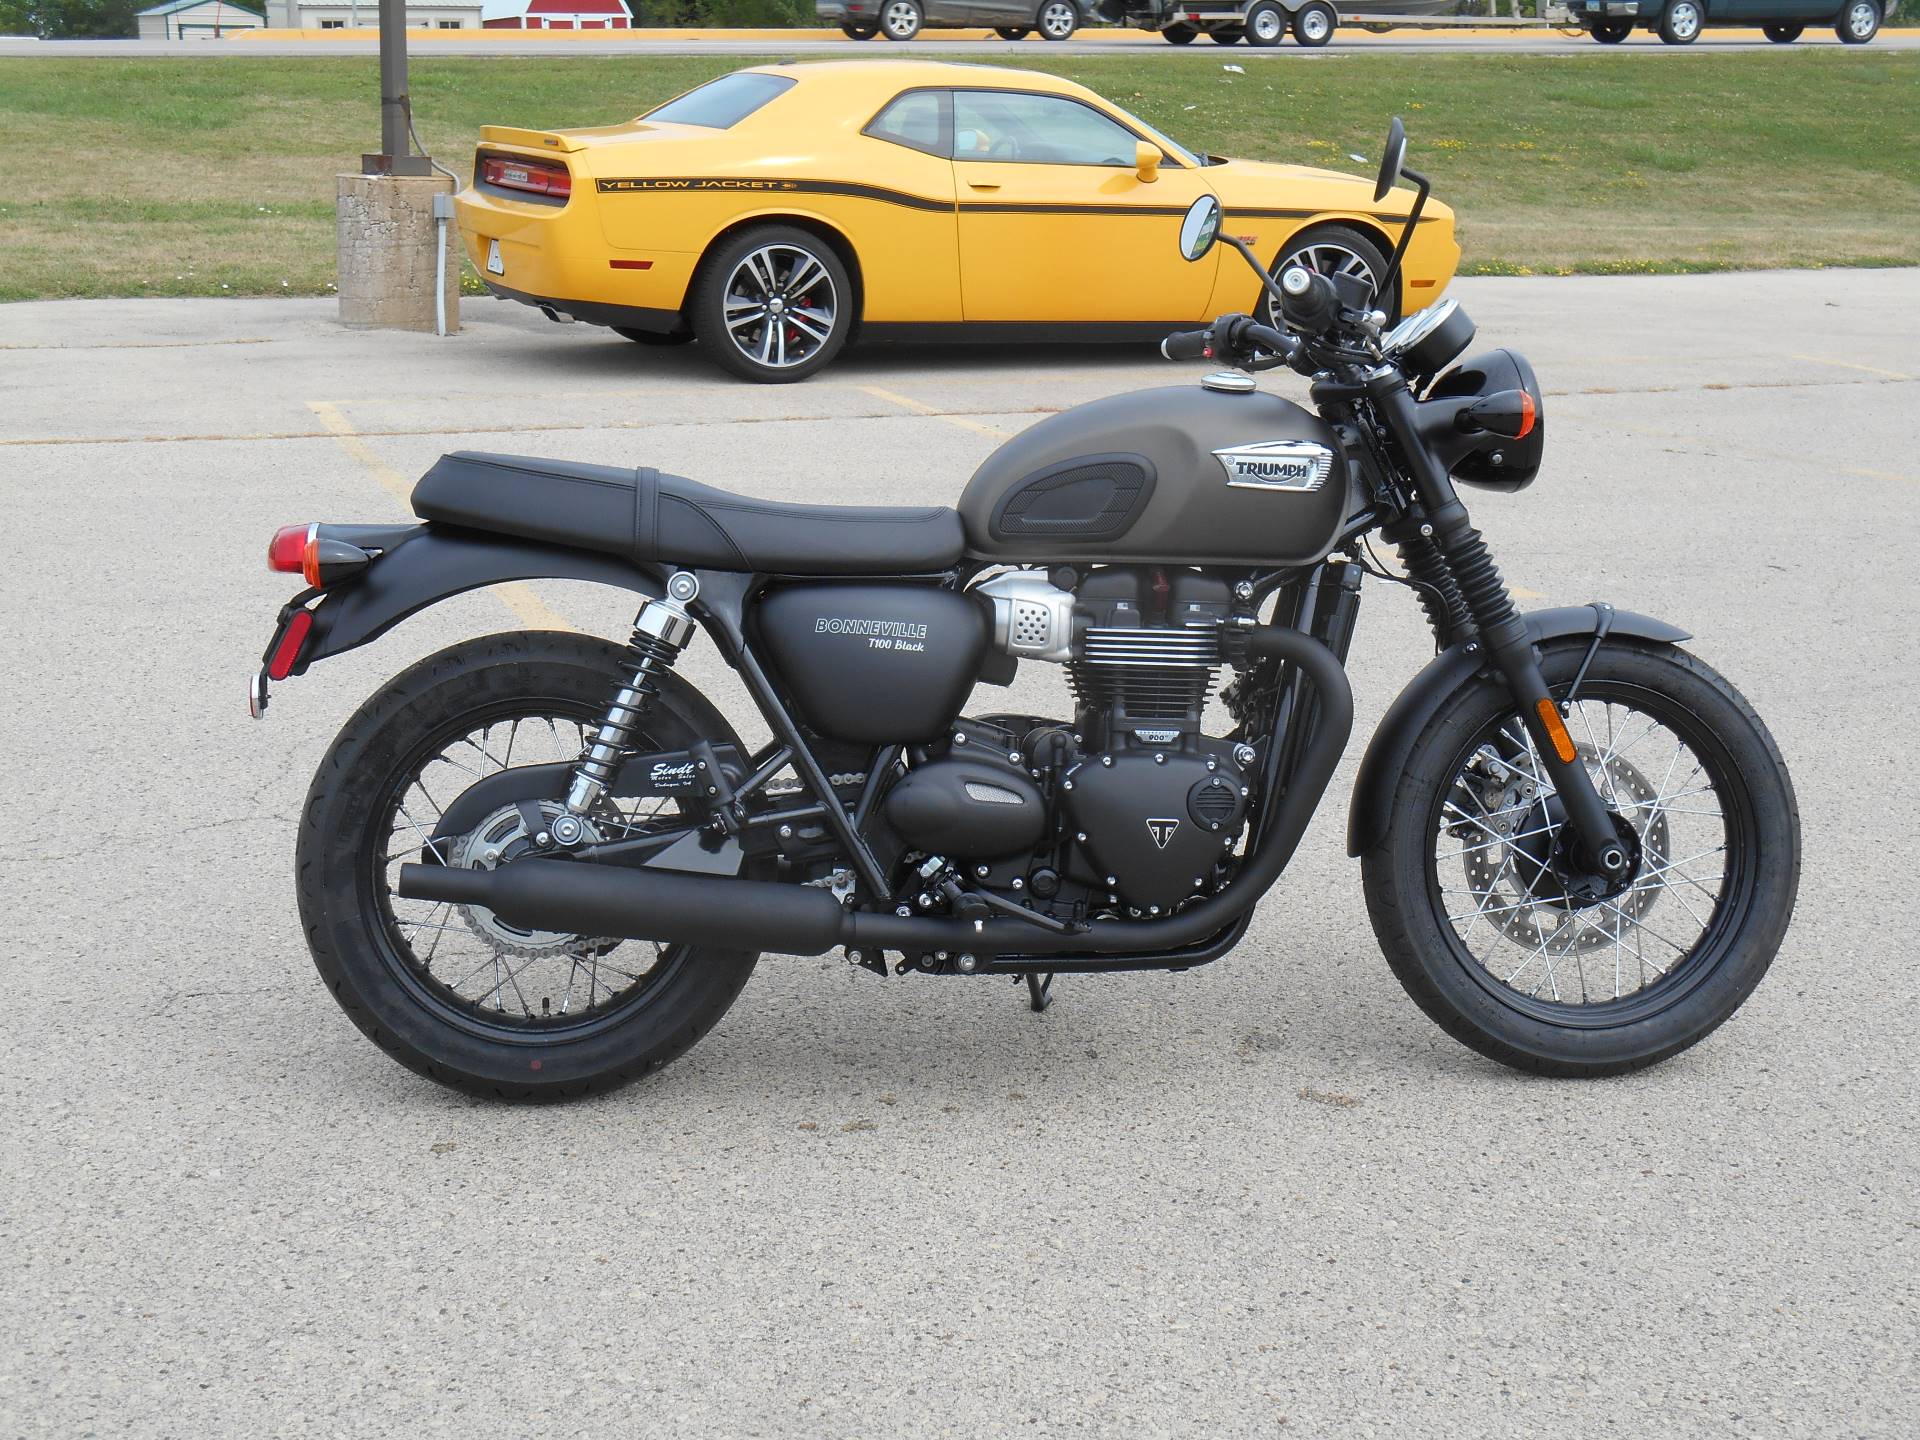 Used 2020 Triumph Bonneville T100 Black Motorcycles In Dubuque Ia Stock Number 981826